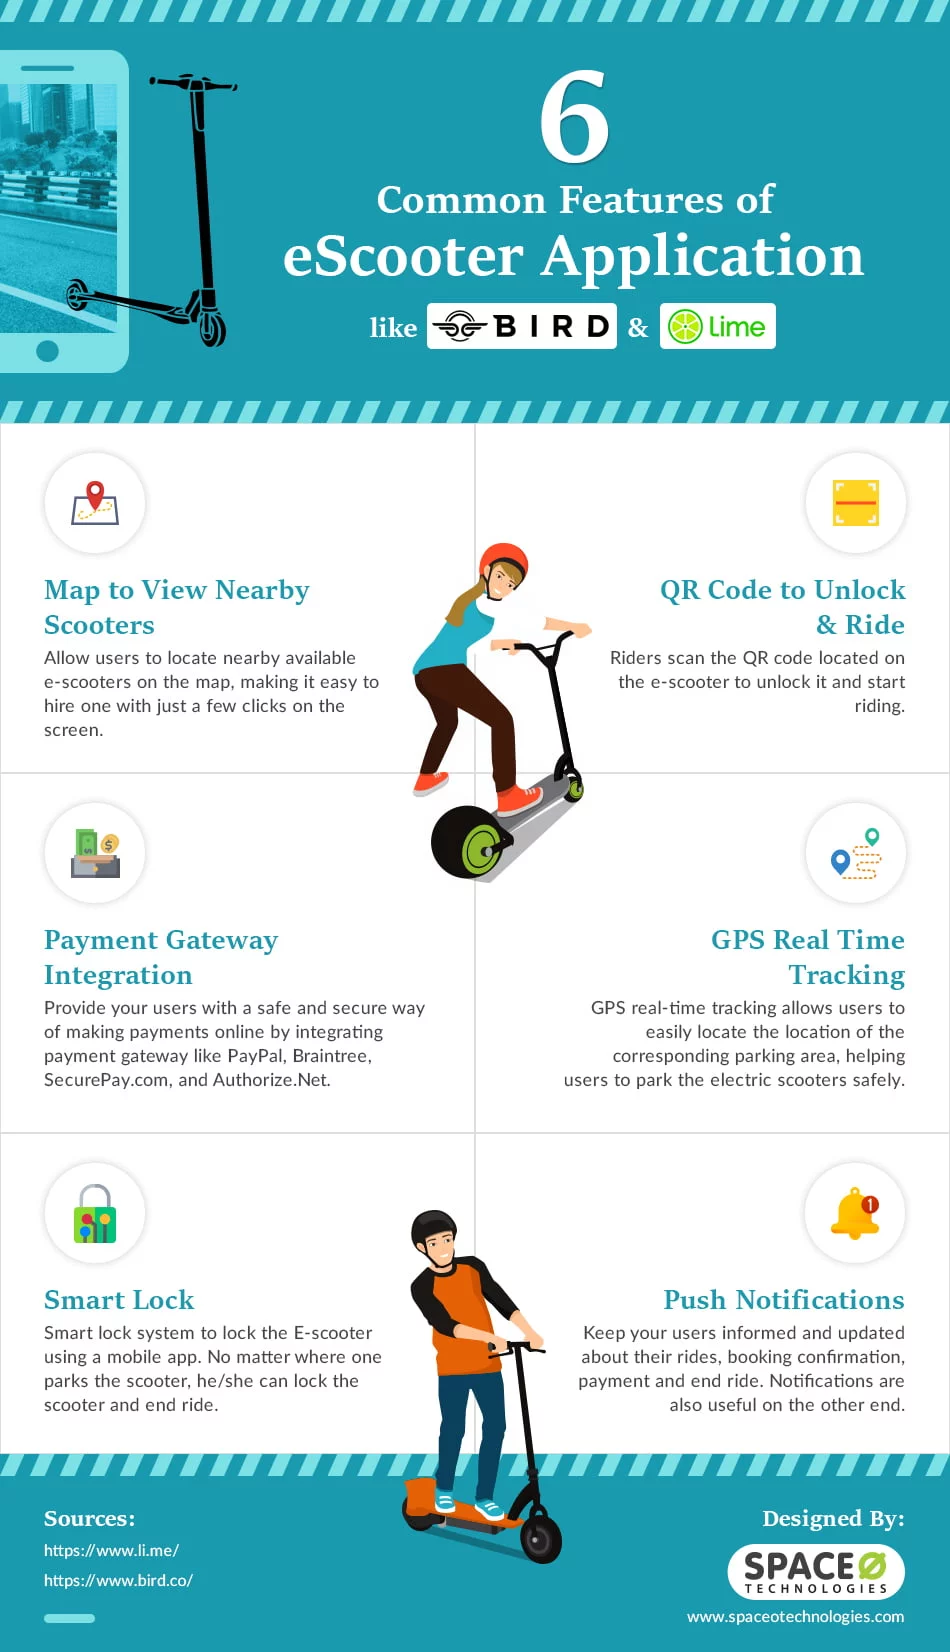 eScooter-app-features-infographic